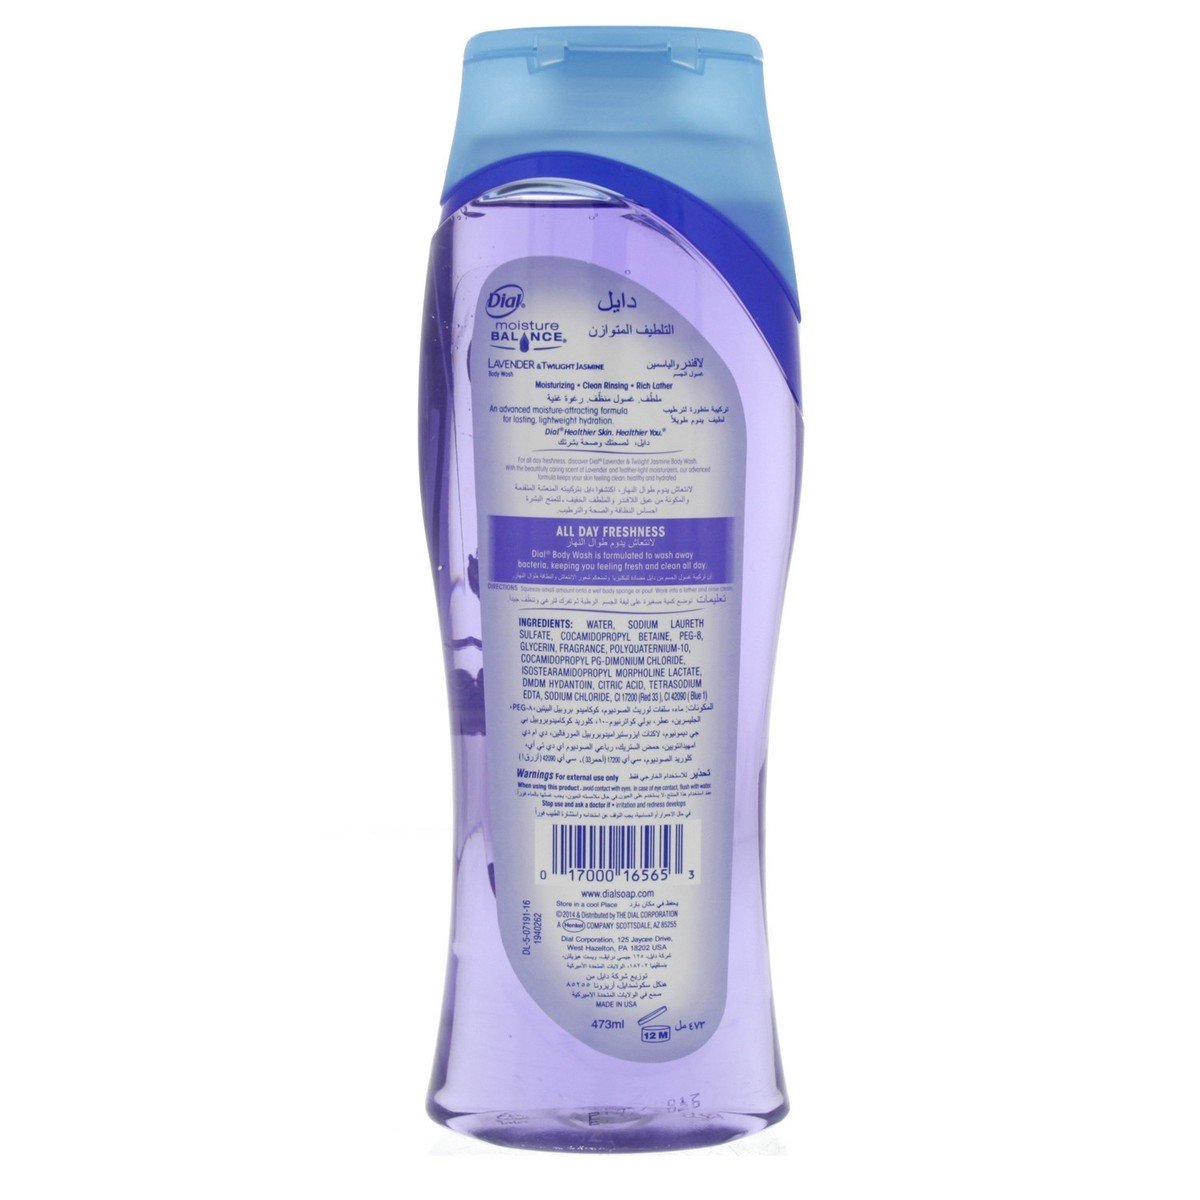 Dial Lavender And Twilight Jasmine Body Wash With Moisturizers 473 ml